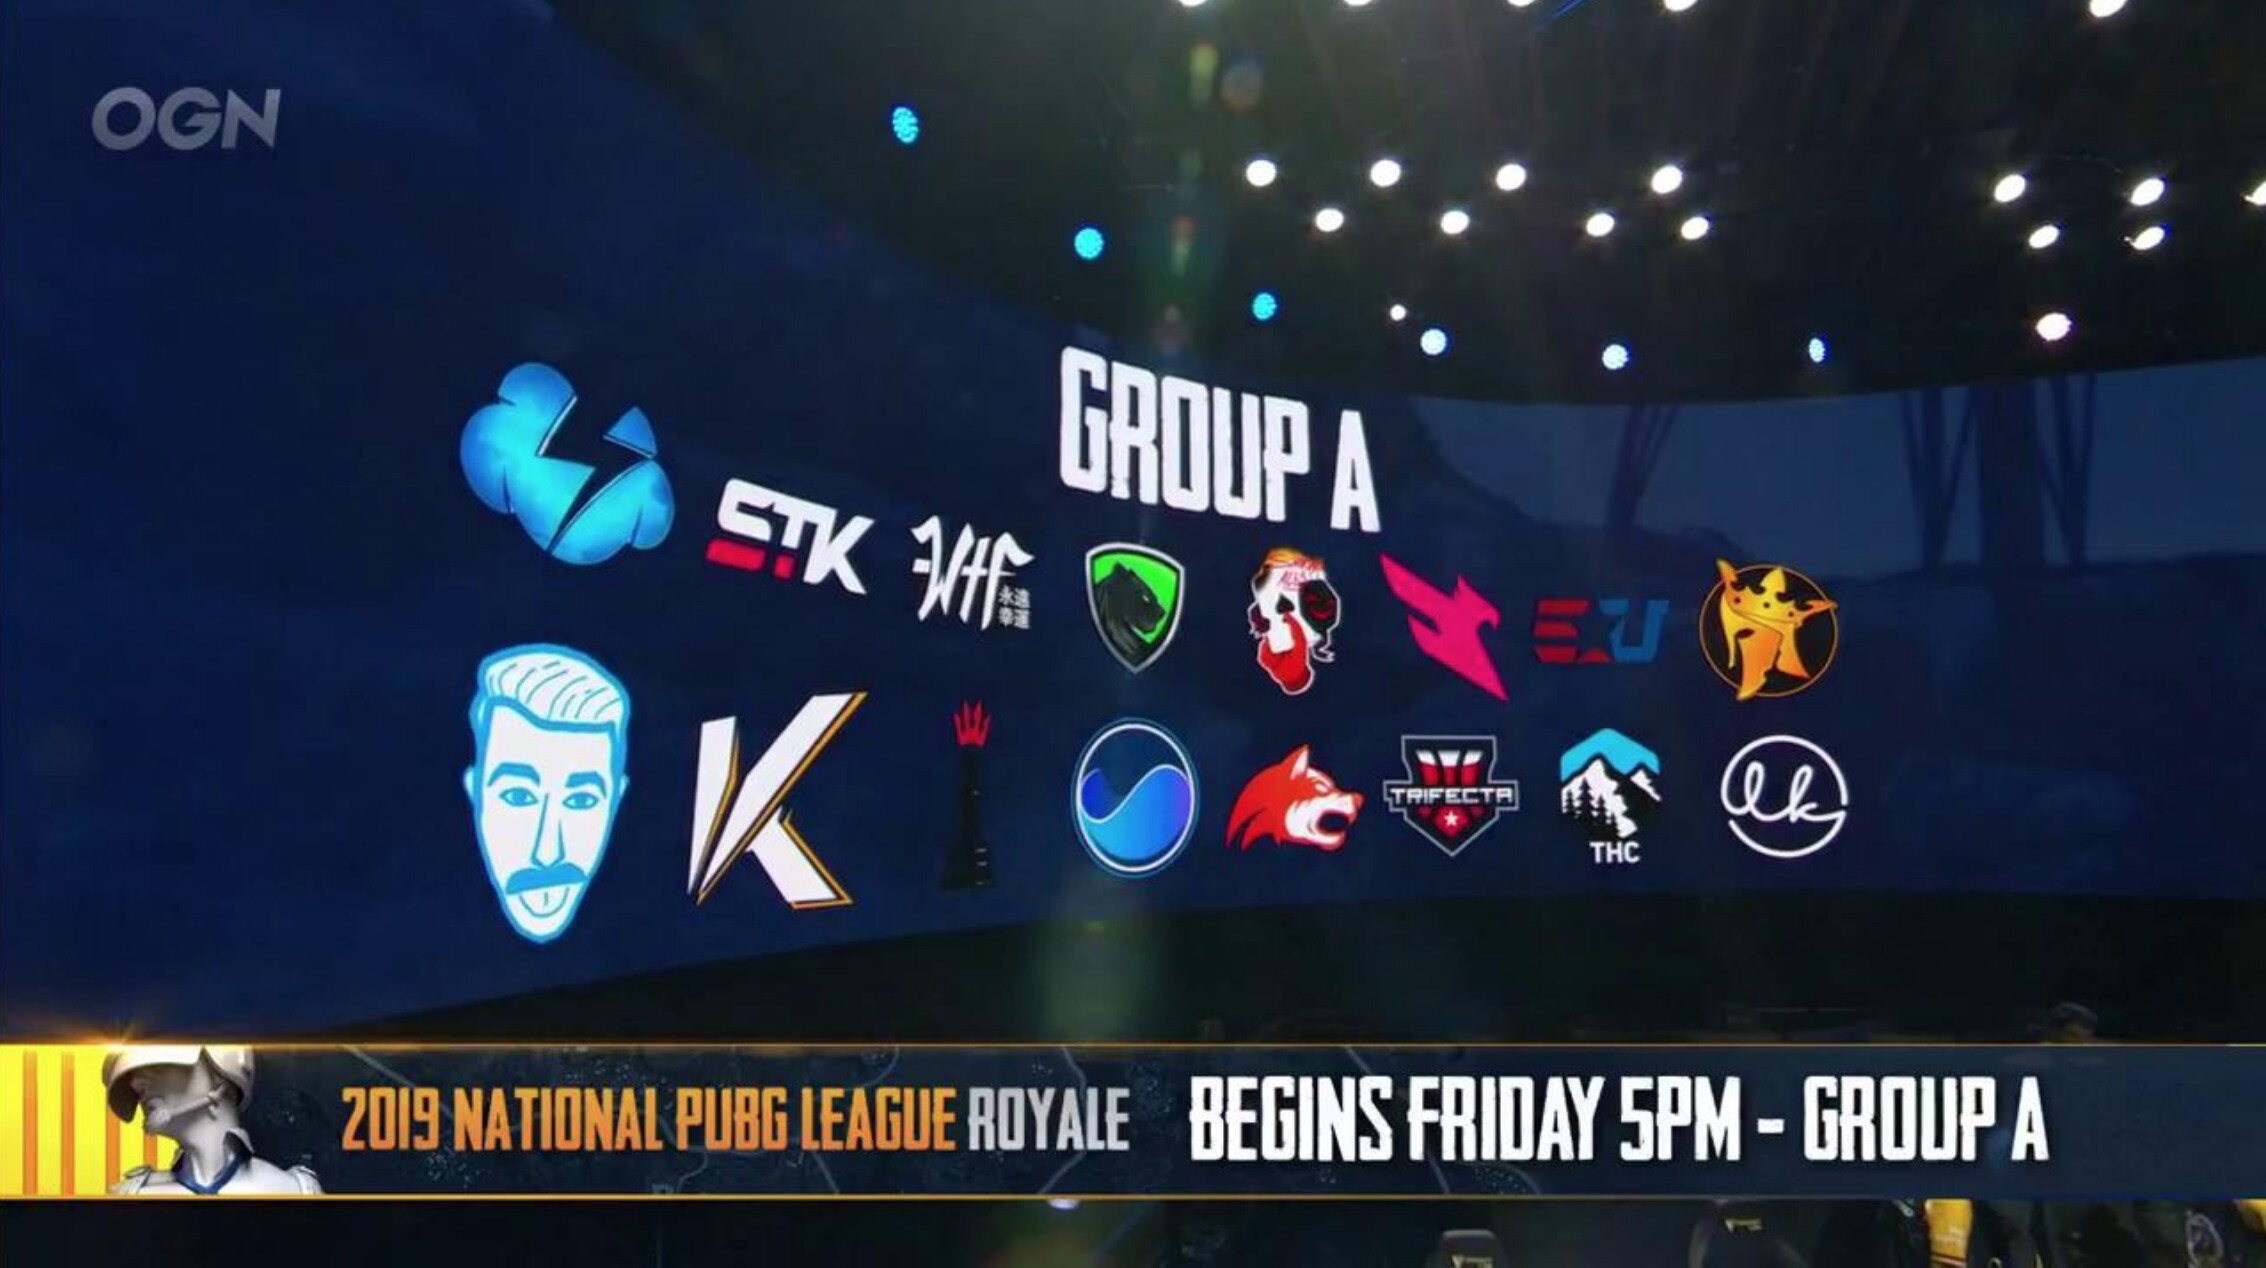 PUBG’s upcoming North American NPL Royale will see the league’s teams competing against NPL Contenders teams for $80,000 USD in prize money (Photo courtesy of OGN)